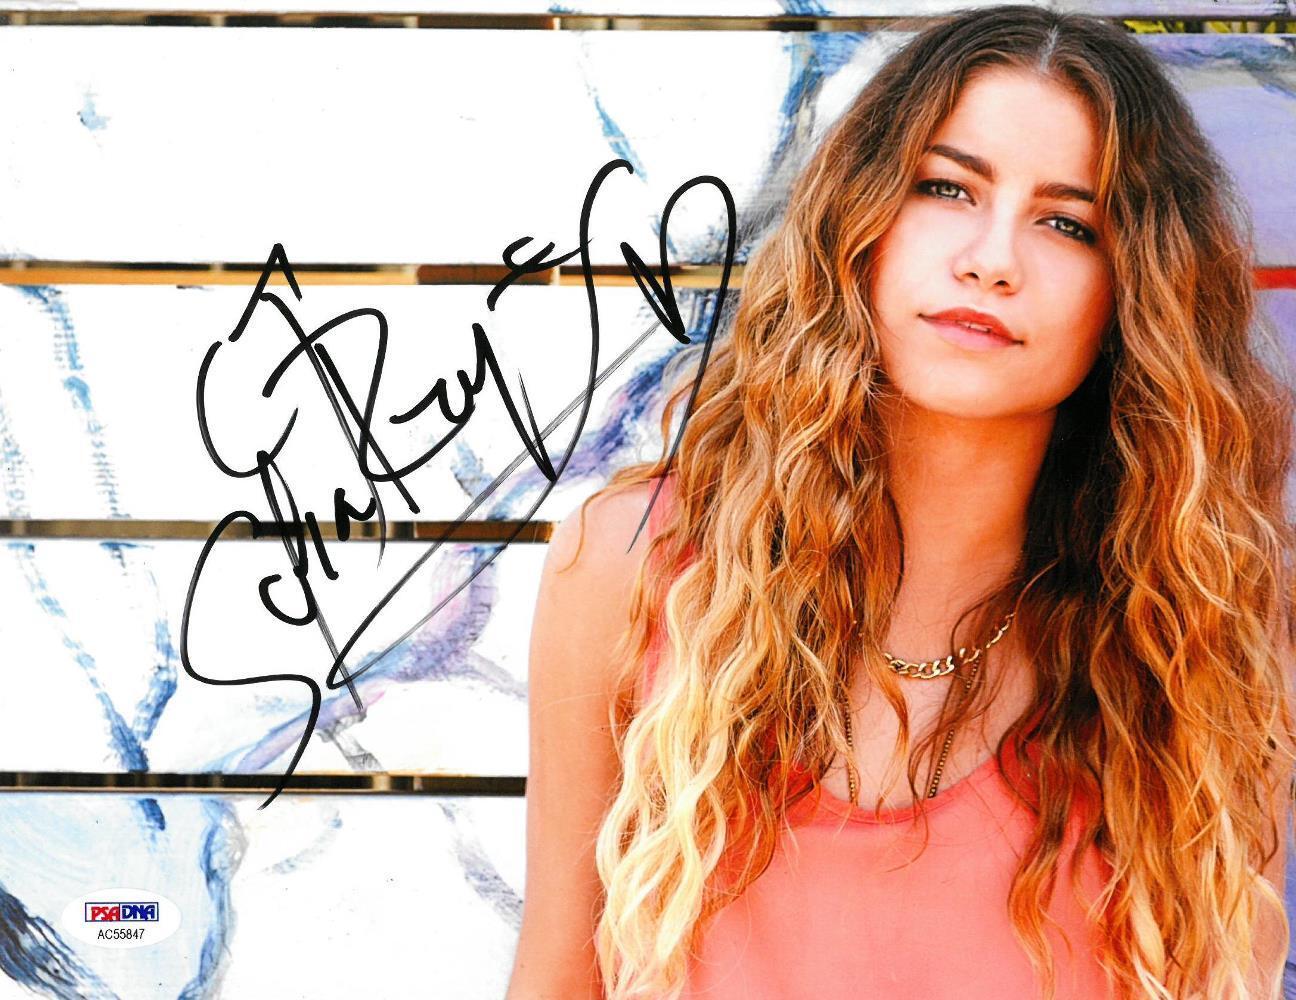 Sofia Reyes Signed Authentic Autographed 8.5x11 Photo Poster painting PSA/DNA #AC55847